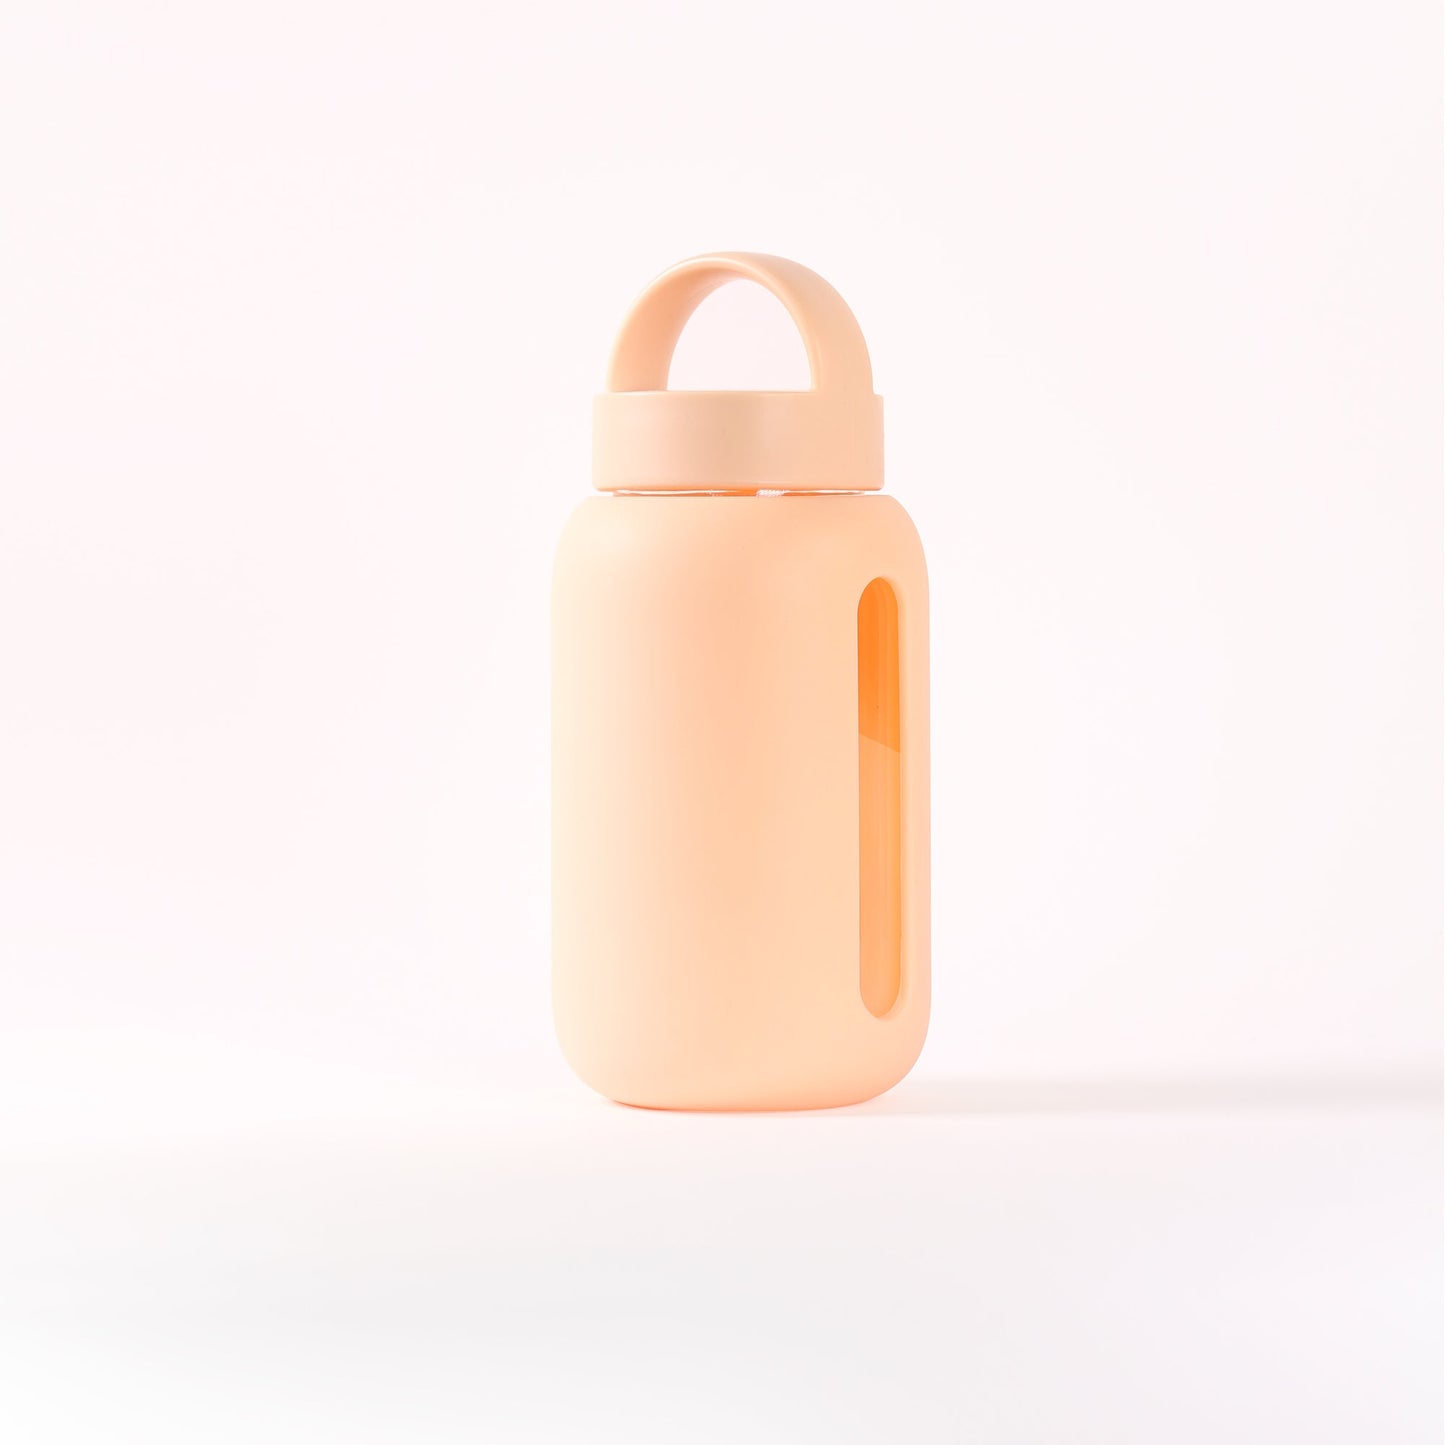 Tiny Must Haves - Miniature Water Bottles 💧💧 Check them